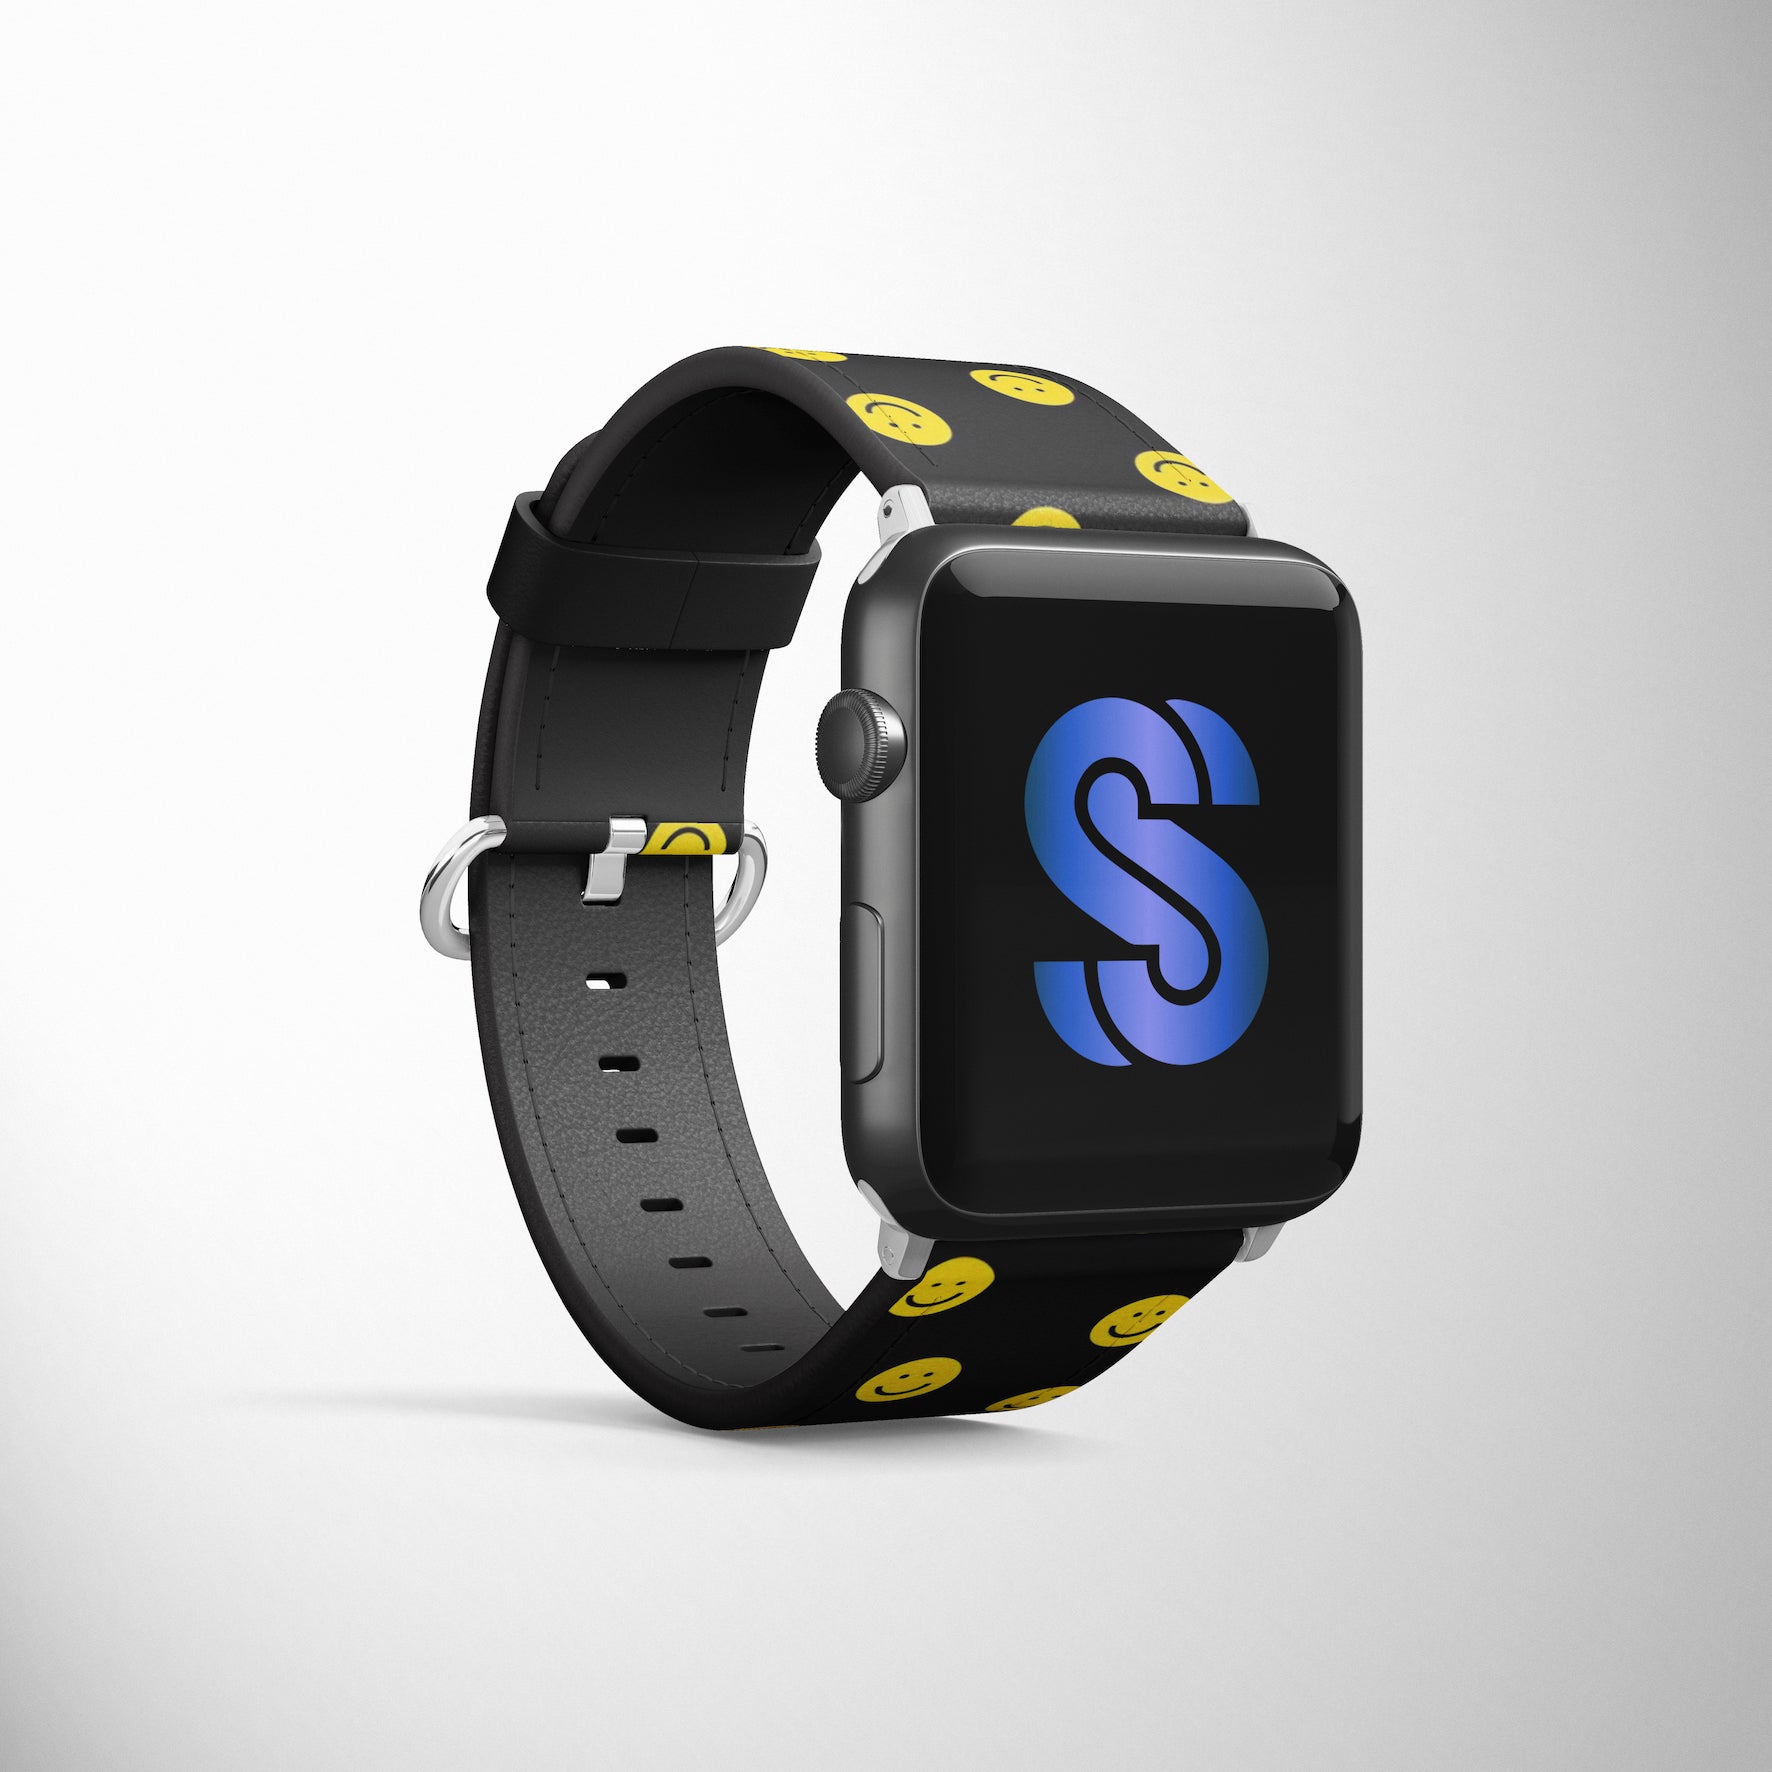 Smileys On Black Faux Leather Apple Watch Band for Apple Watch 1,2,3,4,5,6,SE - www.scottsy.com